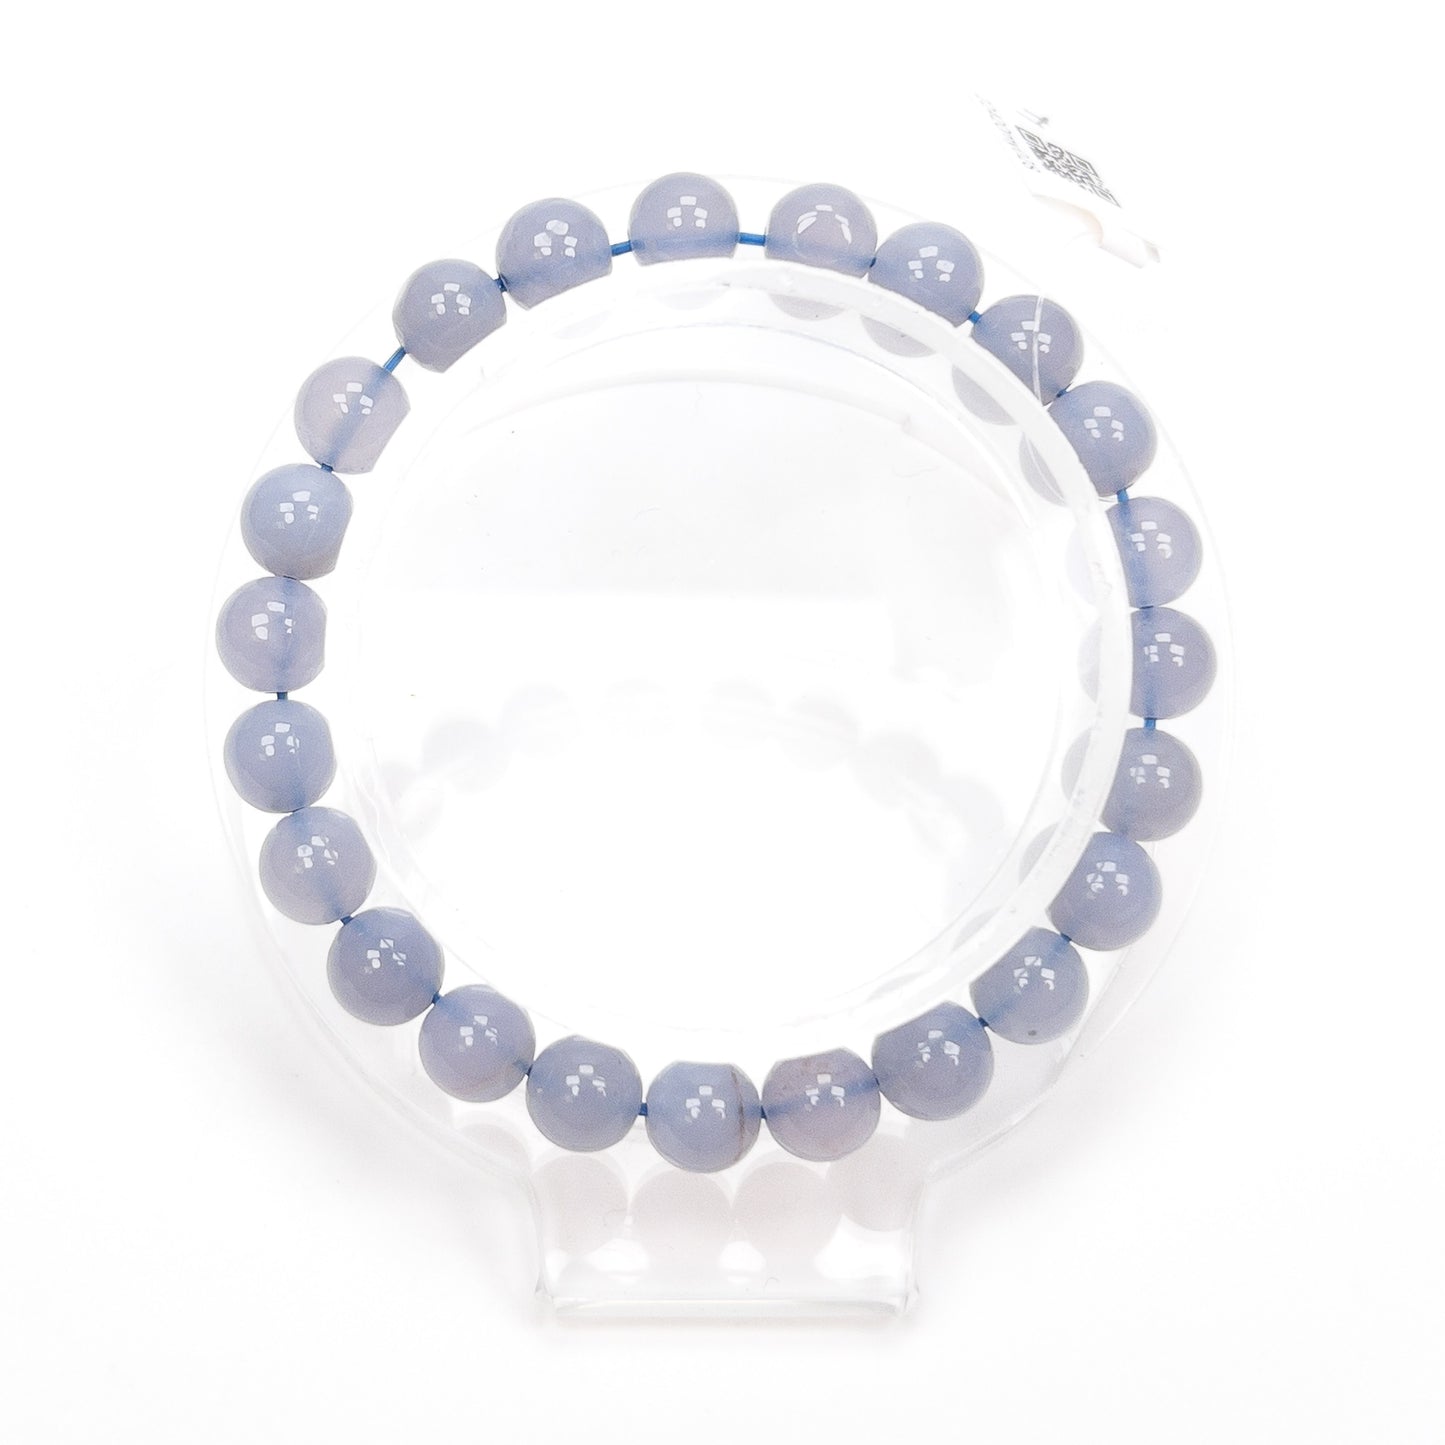 Blue Chalcedony 8mm Smooth Round Bead Stretchy Cord Bracelet - 1 pc.